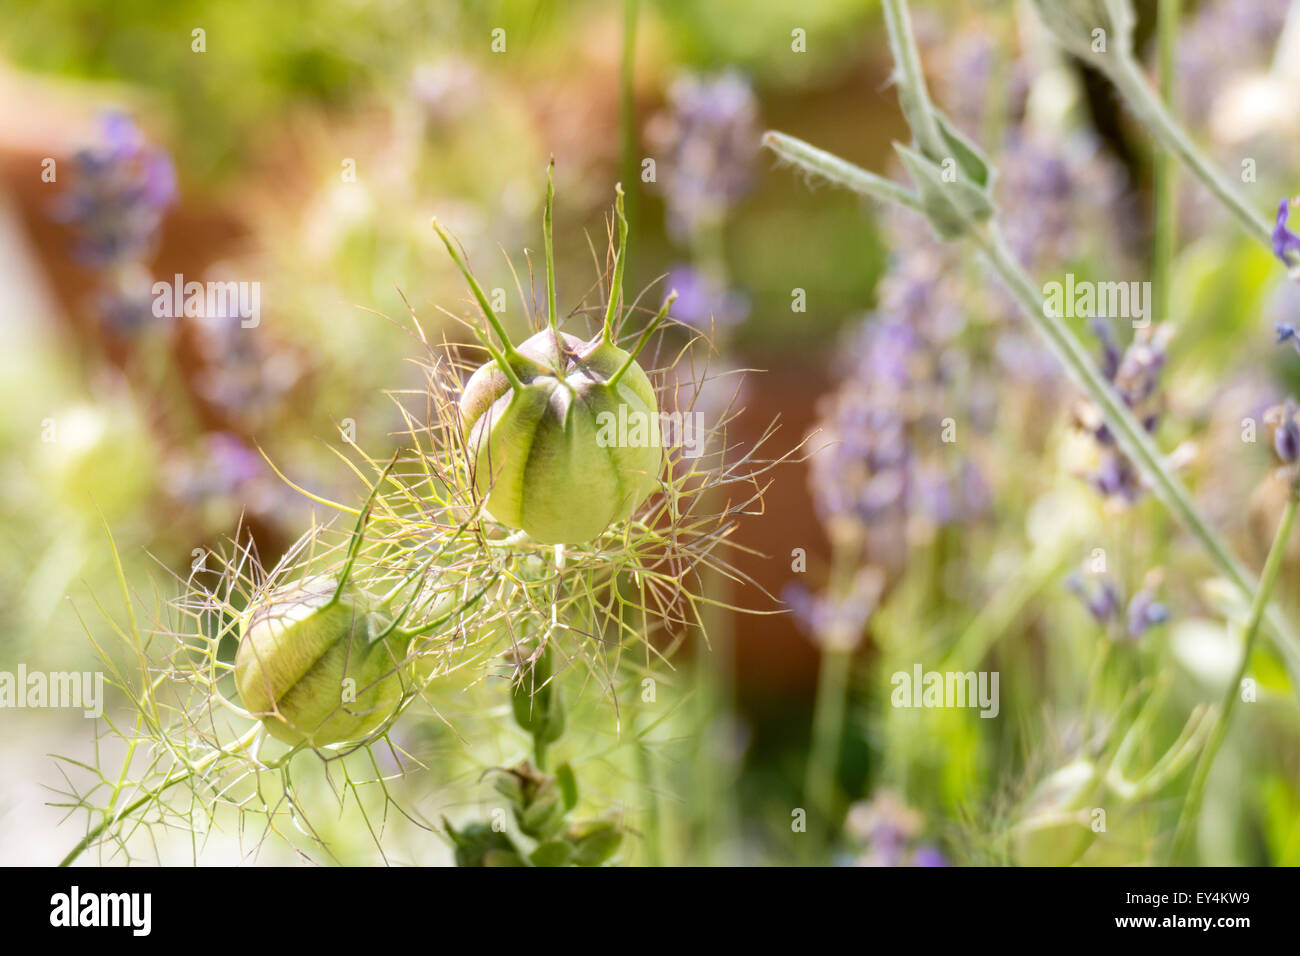 Love-in-a-mist or Ragged Lady (Nigella damascena), seed pods Stock Photo